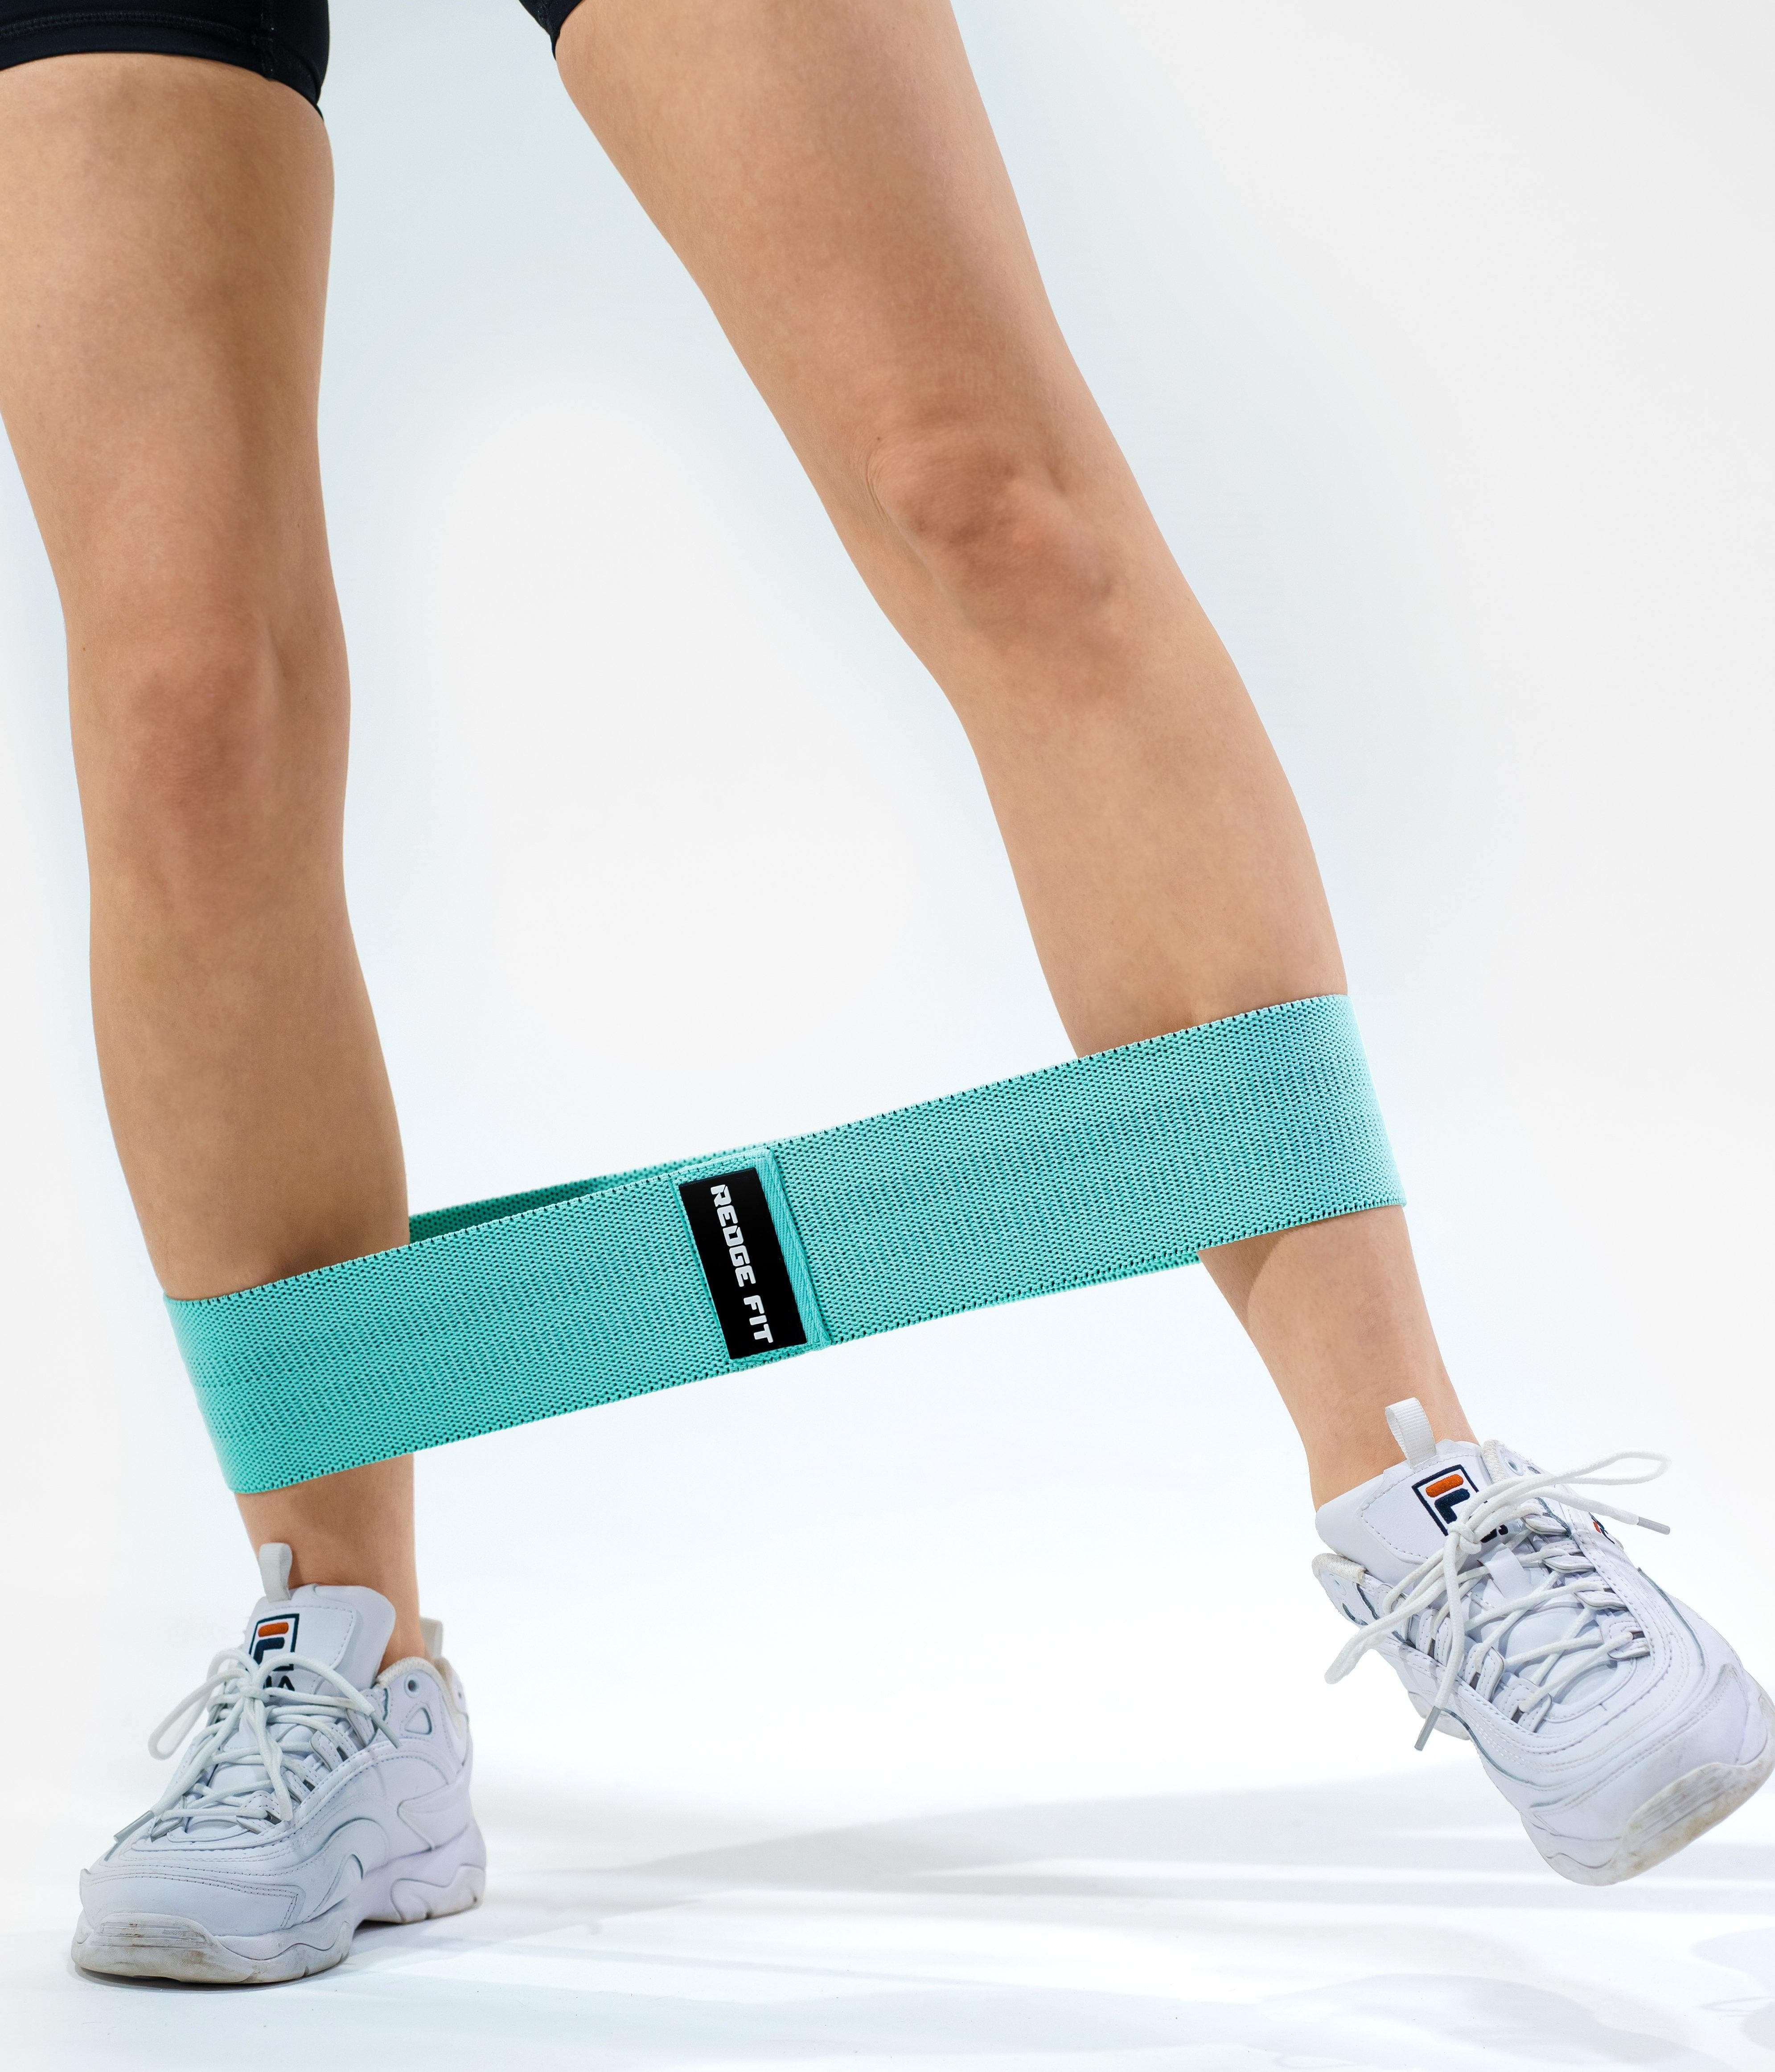 Person modeling Resistance/Sizing: Teal: Heavy weight 18-27kg (40-60lbs), 74cm long and 8cm wide. Material:  40% Cotton, 60% Latex Available at https://www.getredge.com/products/redge-resistance-band-set